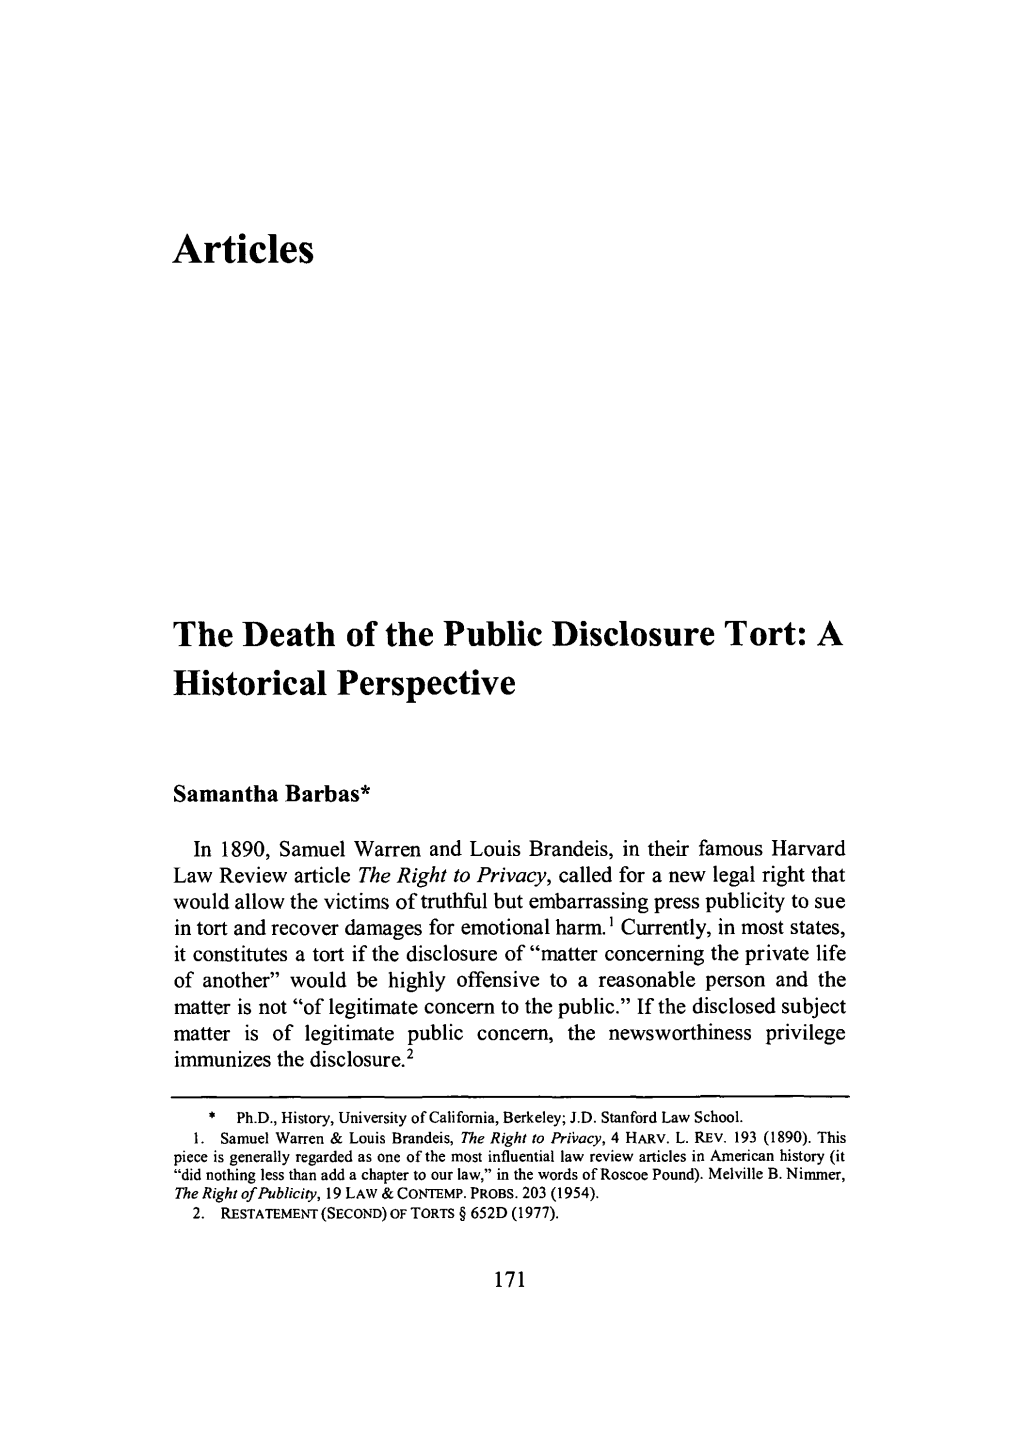 The Death of the Public Disclosure Tort: a Historical Perspective